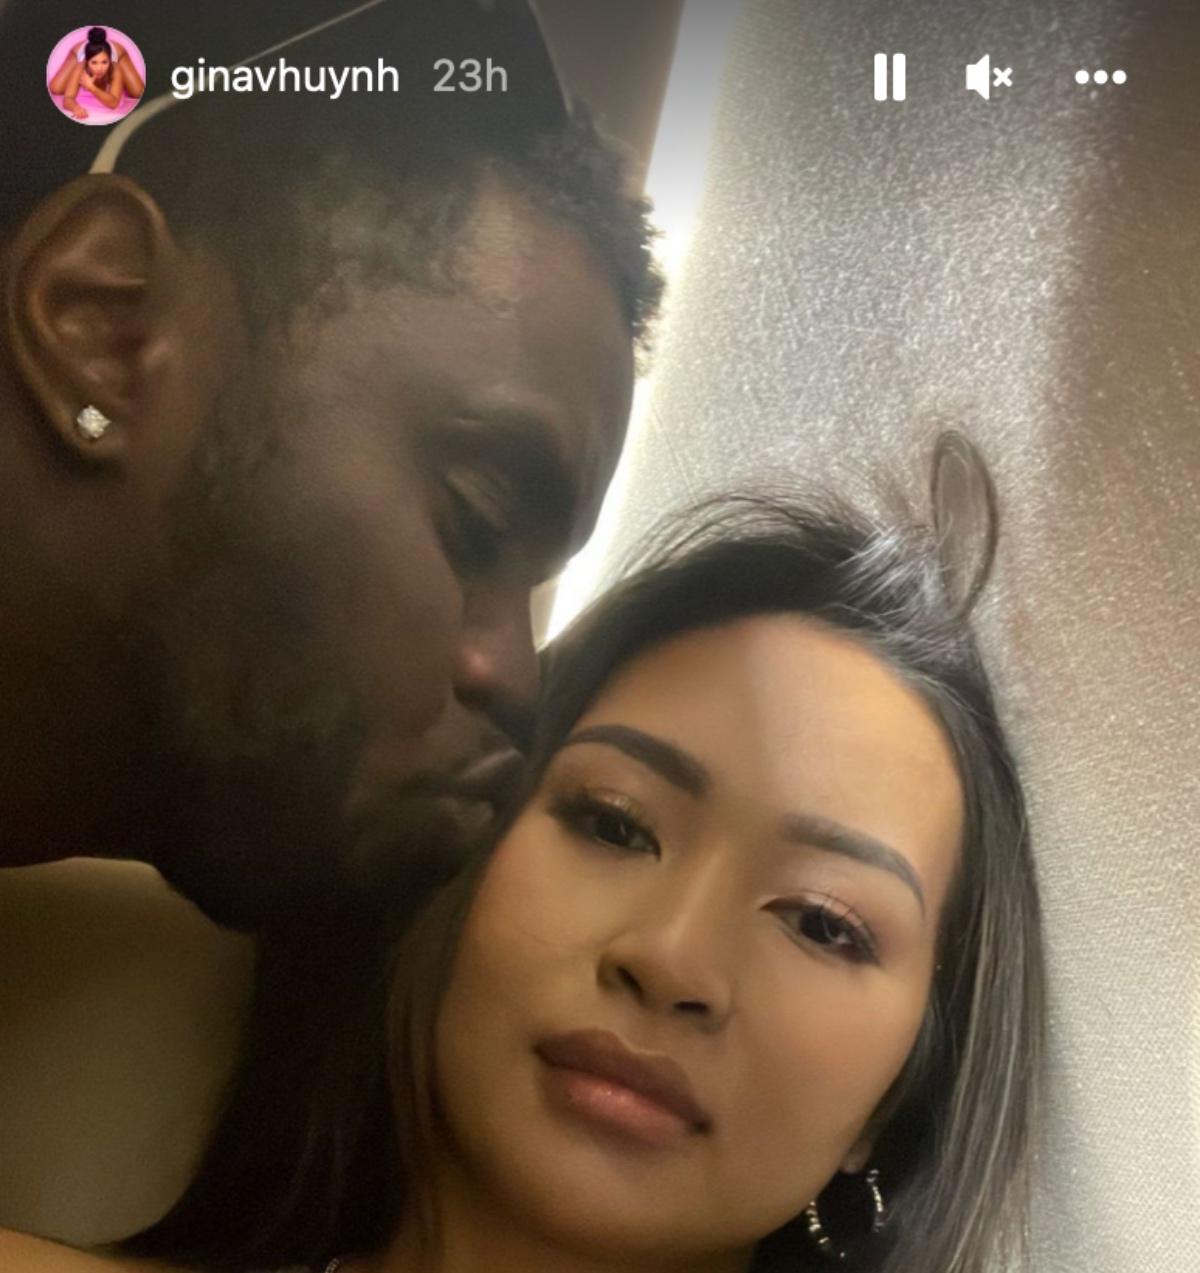 A screenshot of Diddy and Gina Huynh from the model's Instagram Stories